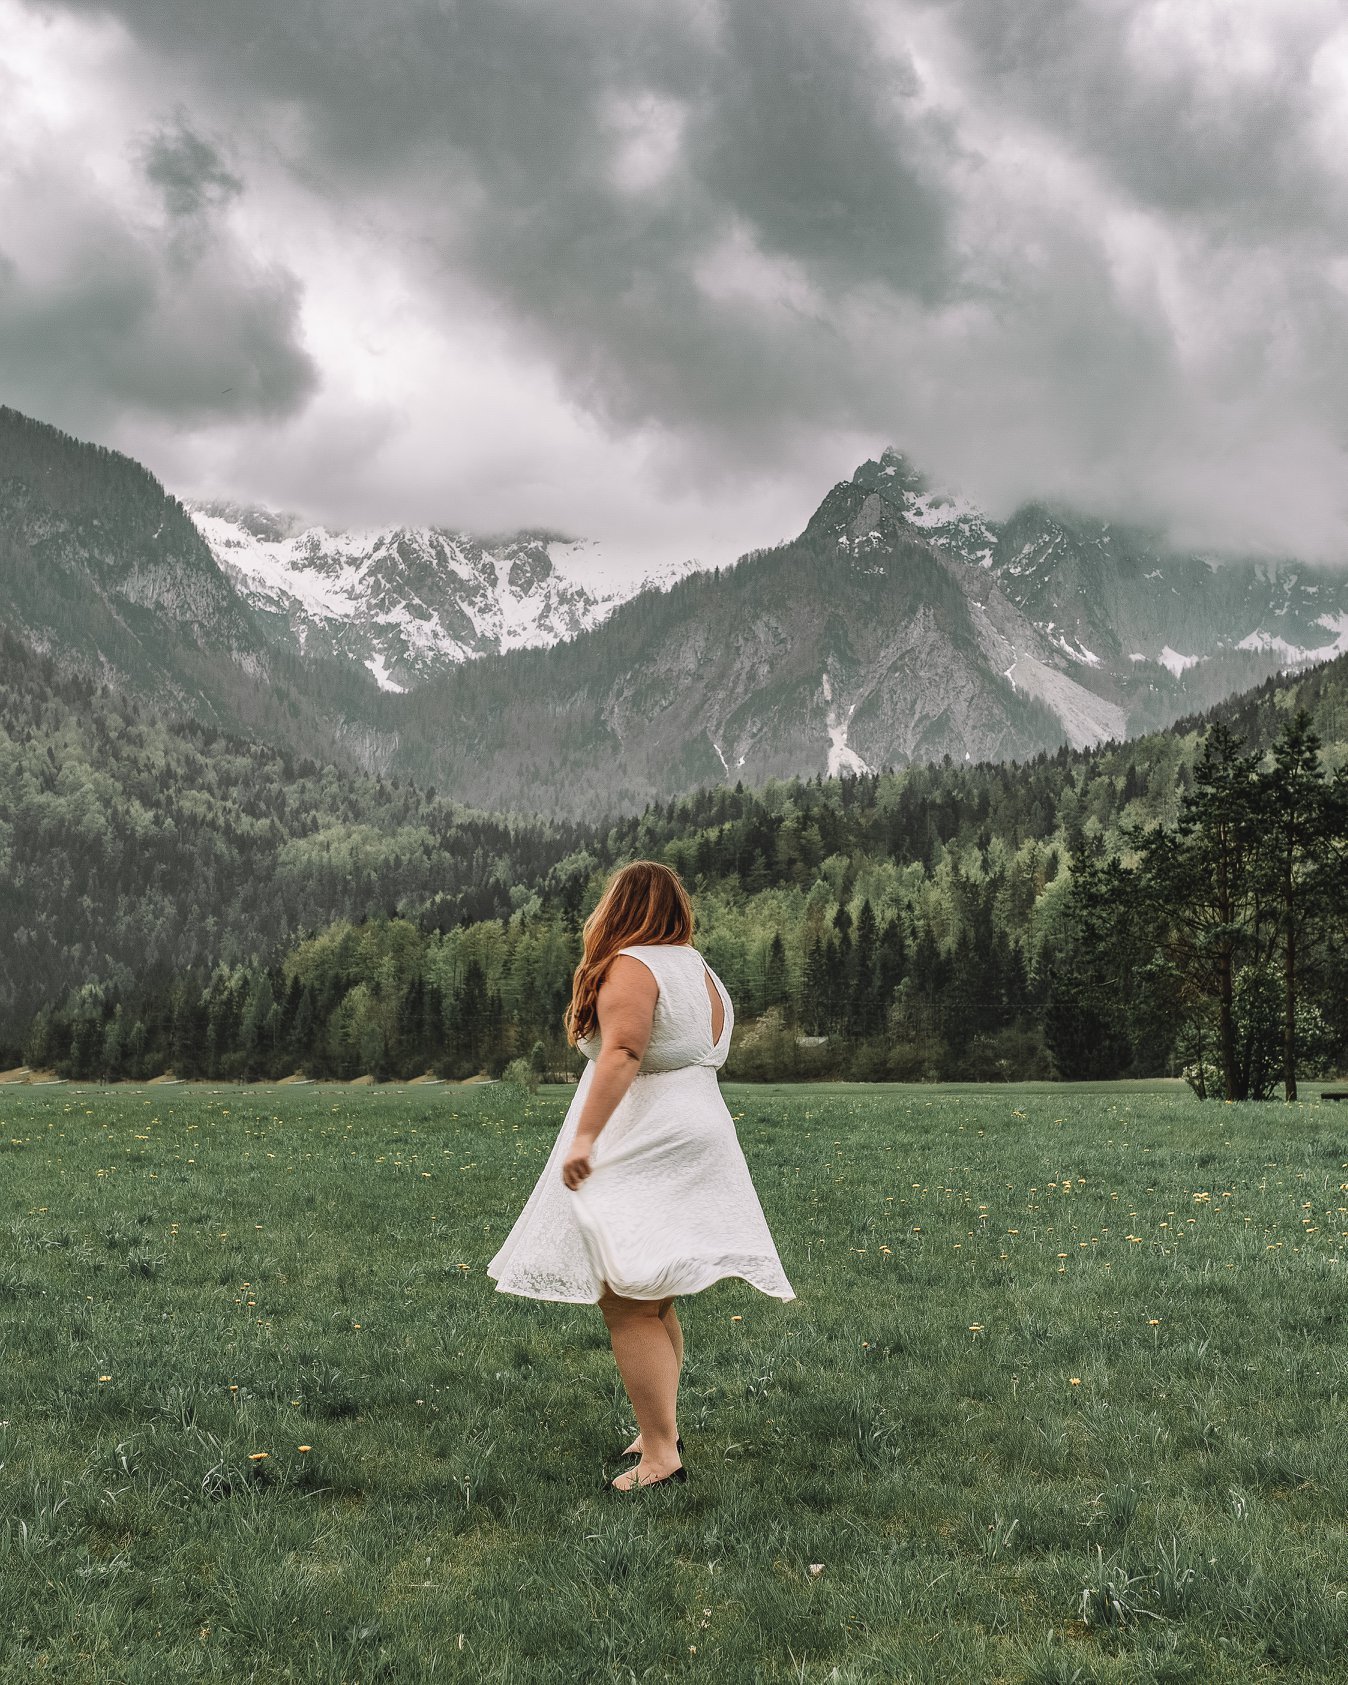 How to get incredible photos of yourself while traveling in Slovenia!